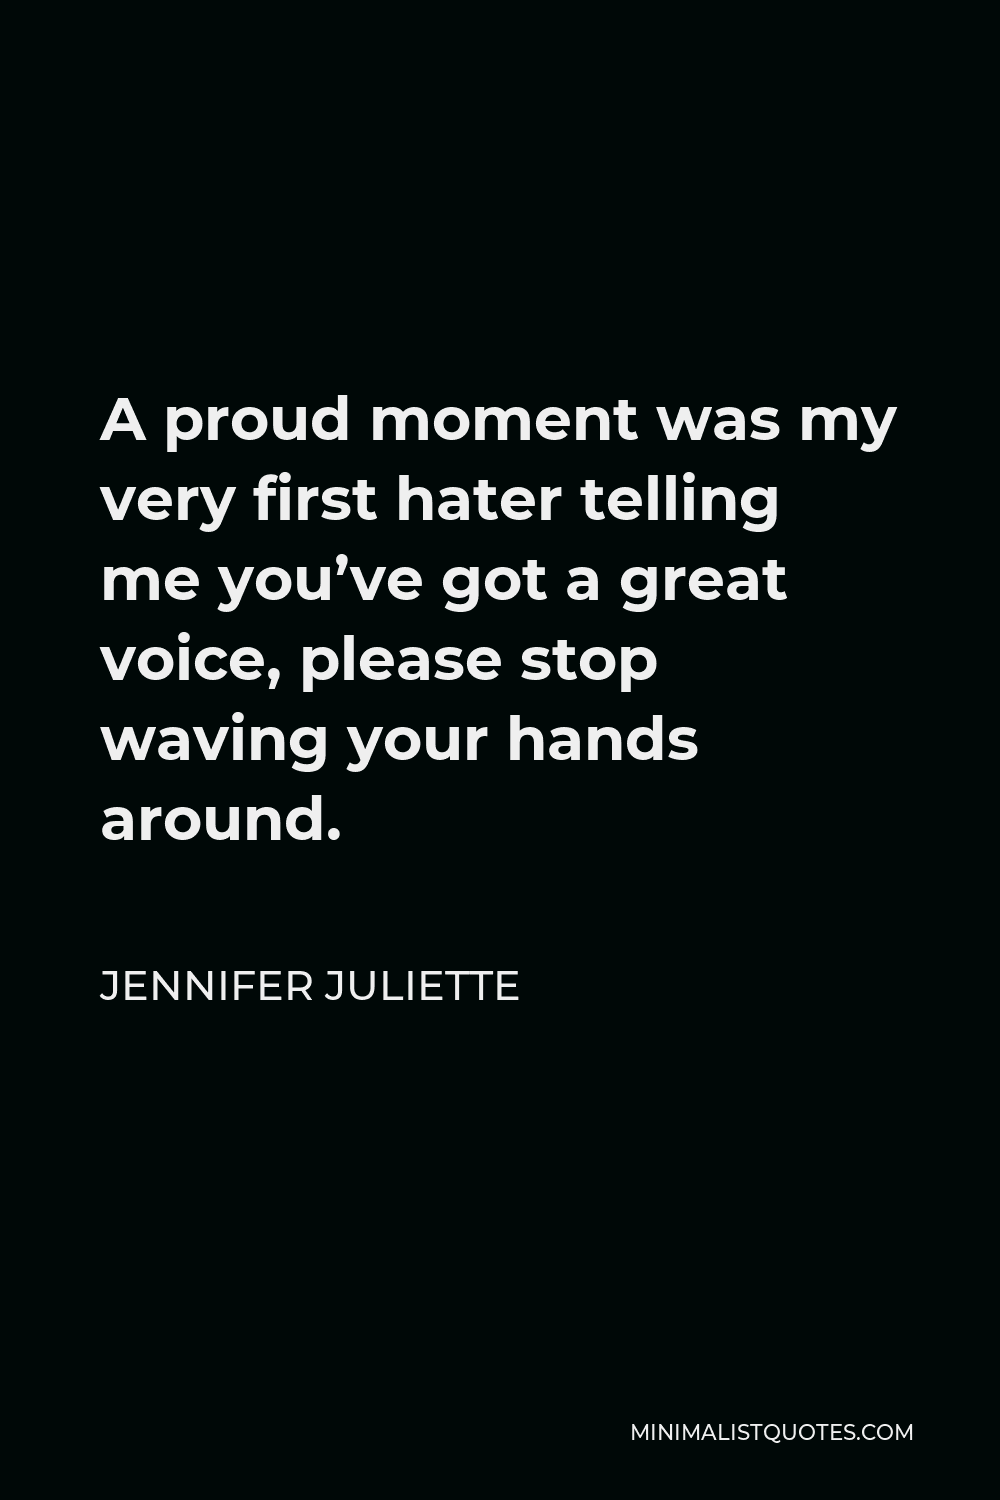 Jennifer Juliette Quote - A proud moment was my very first hater telling me you’ve got a great voice, please stop waving your hands around.